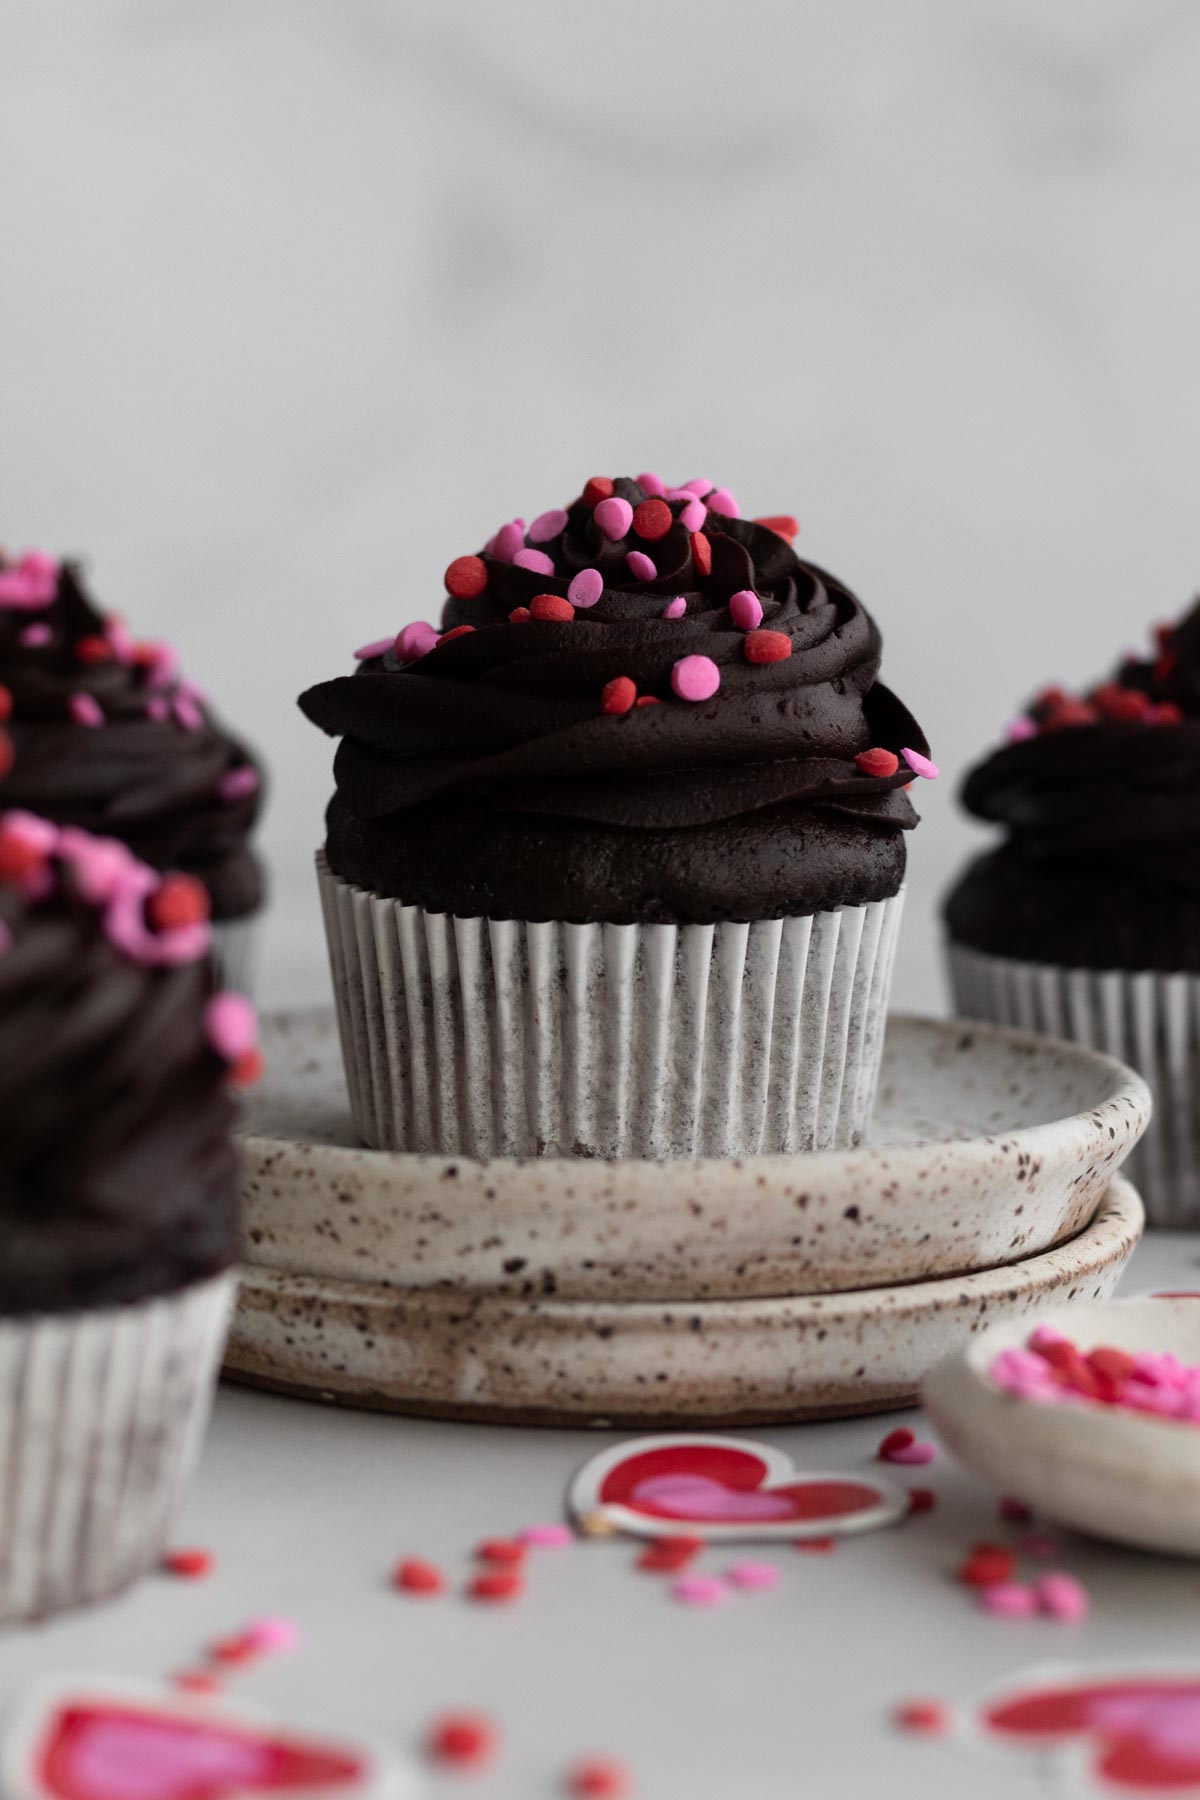 A stout chocolate cupcake sits higher than the others on ceramic plates.